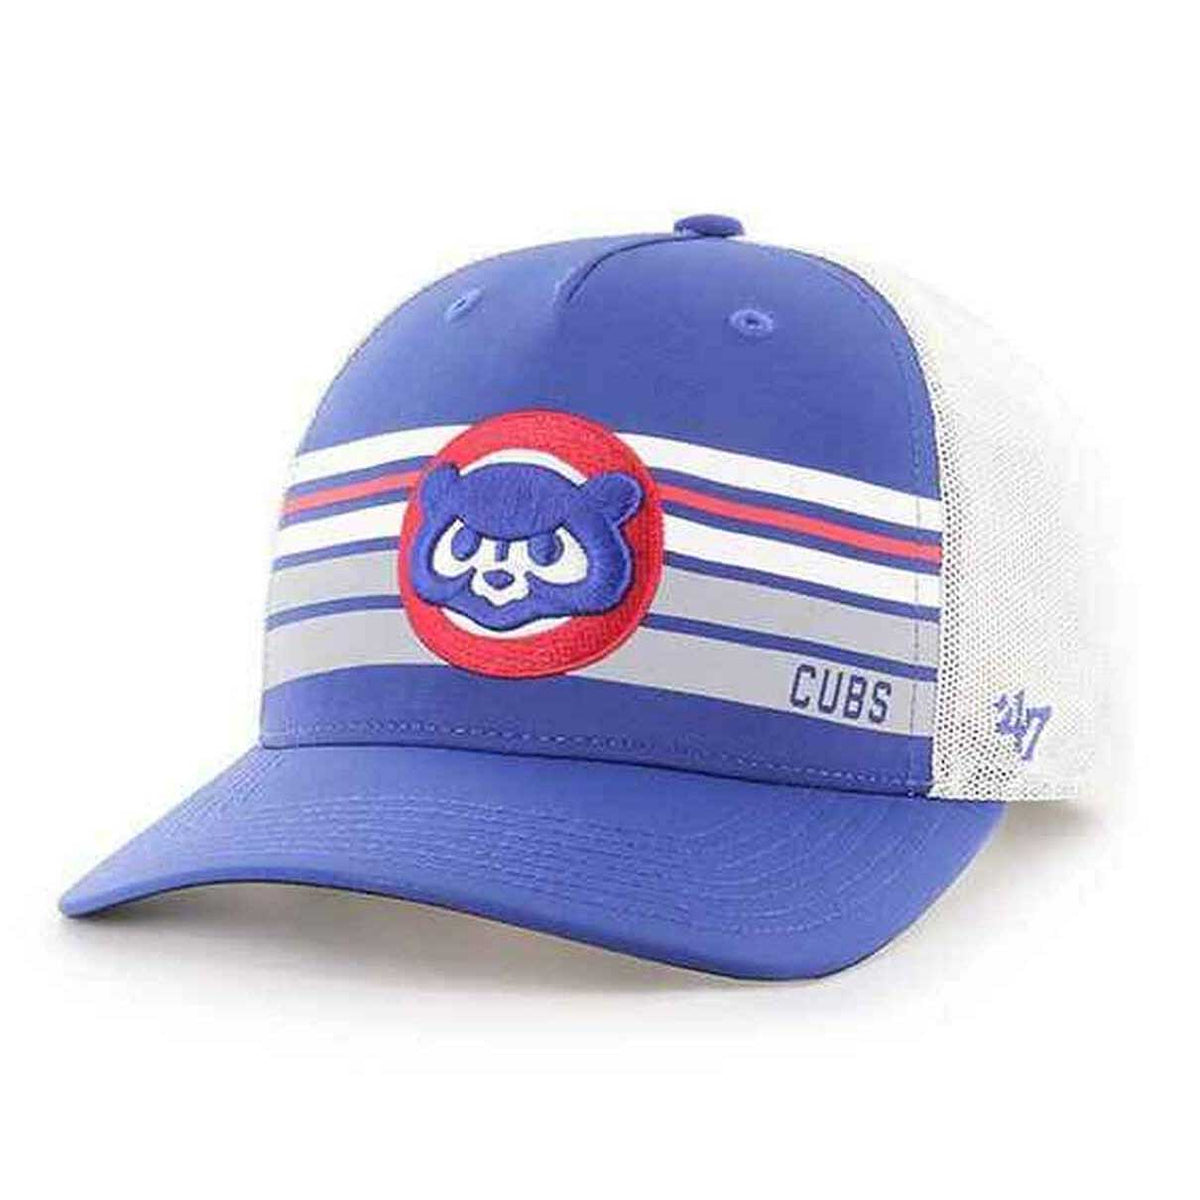 Chicago Cubs 1969 Cooperstown Patch Foam Trucker Snapback